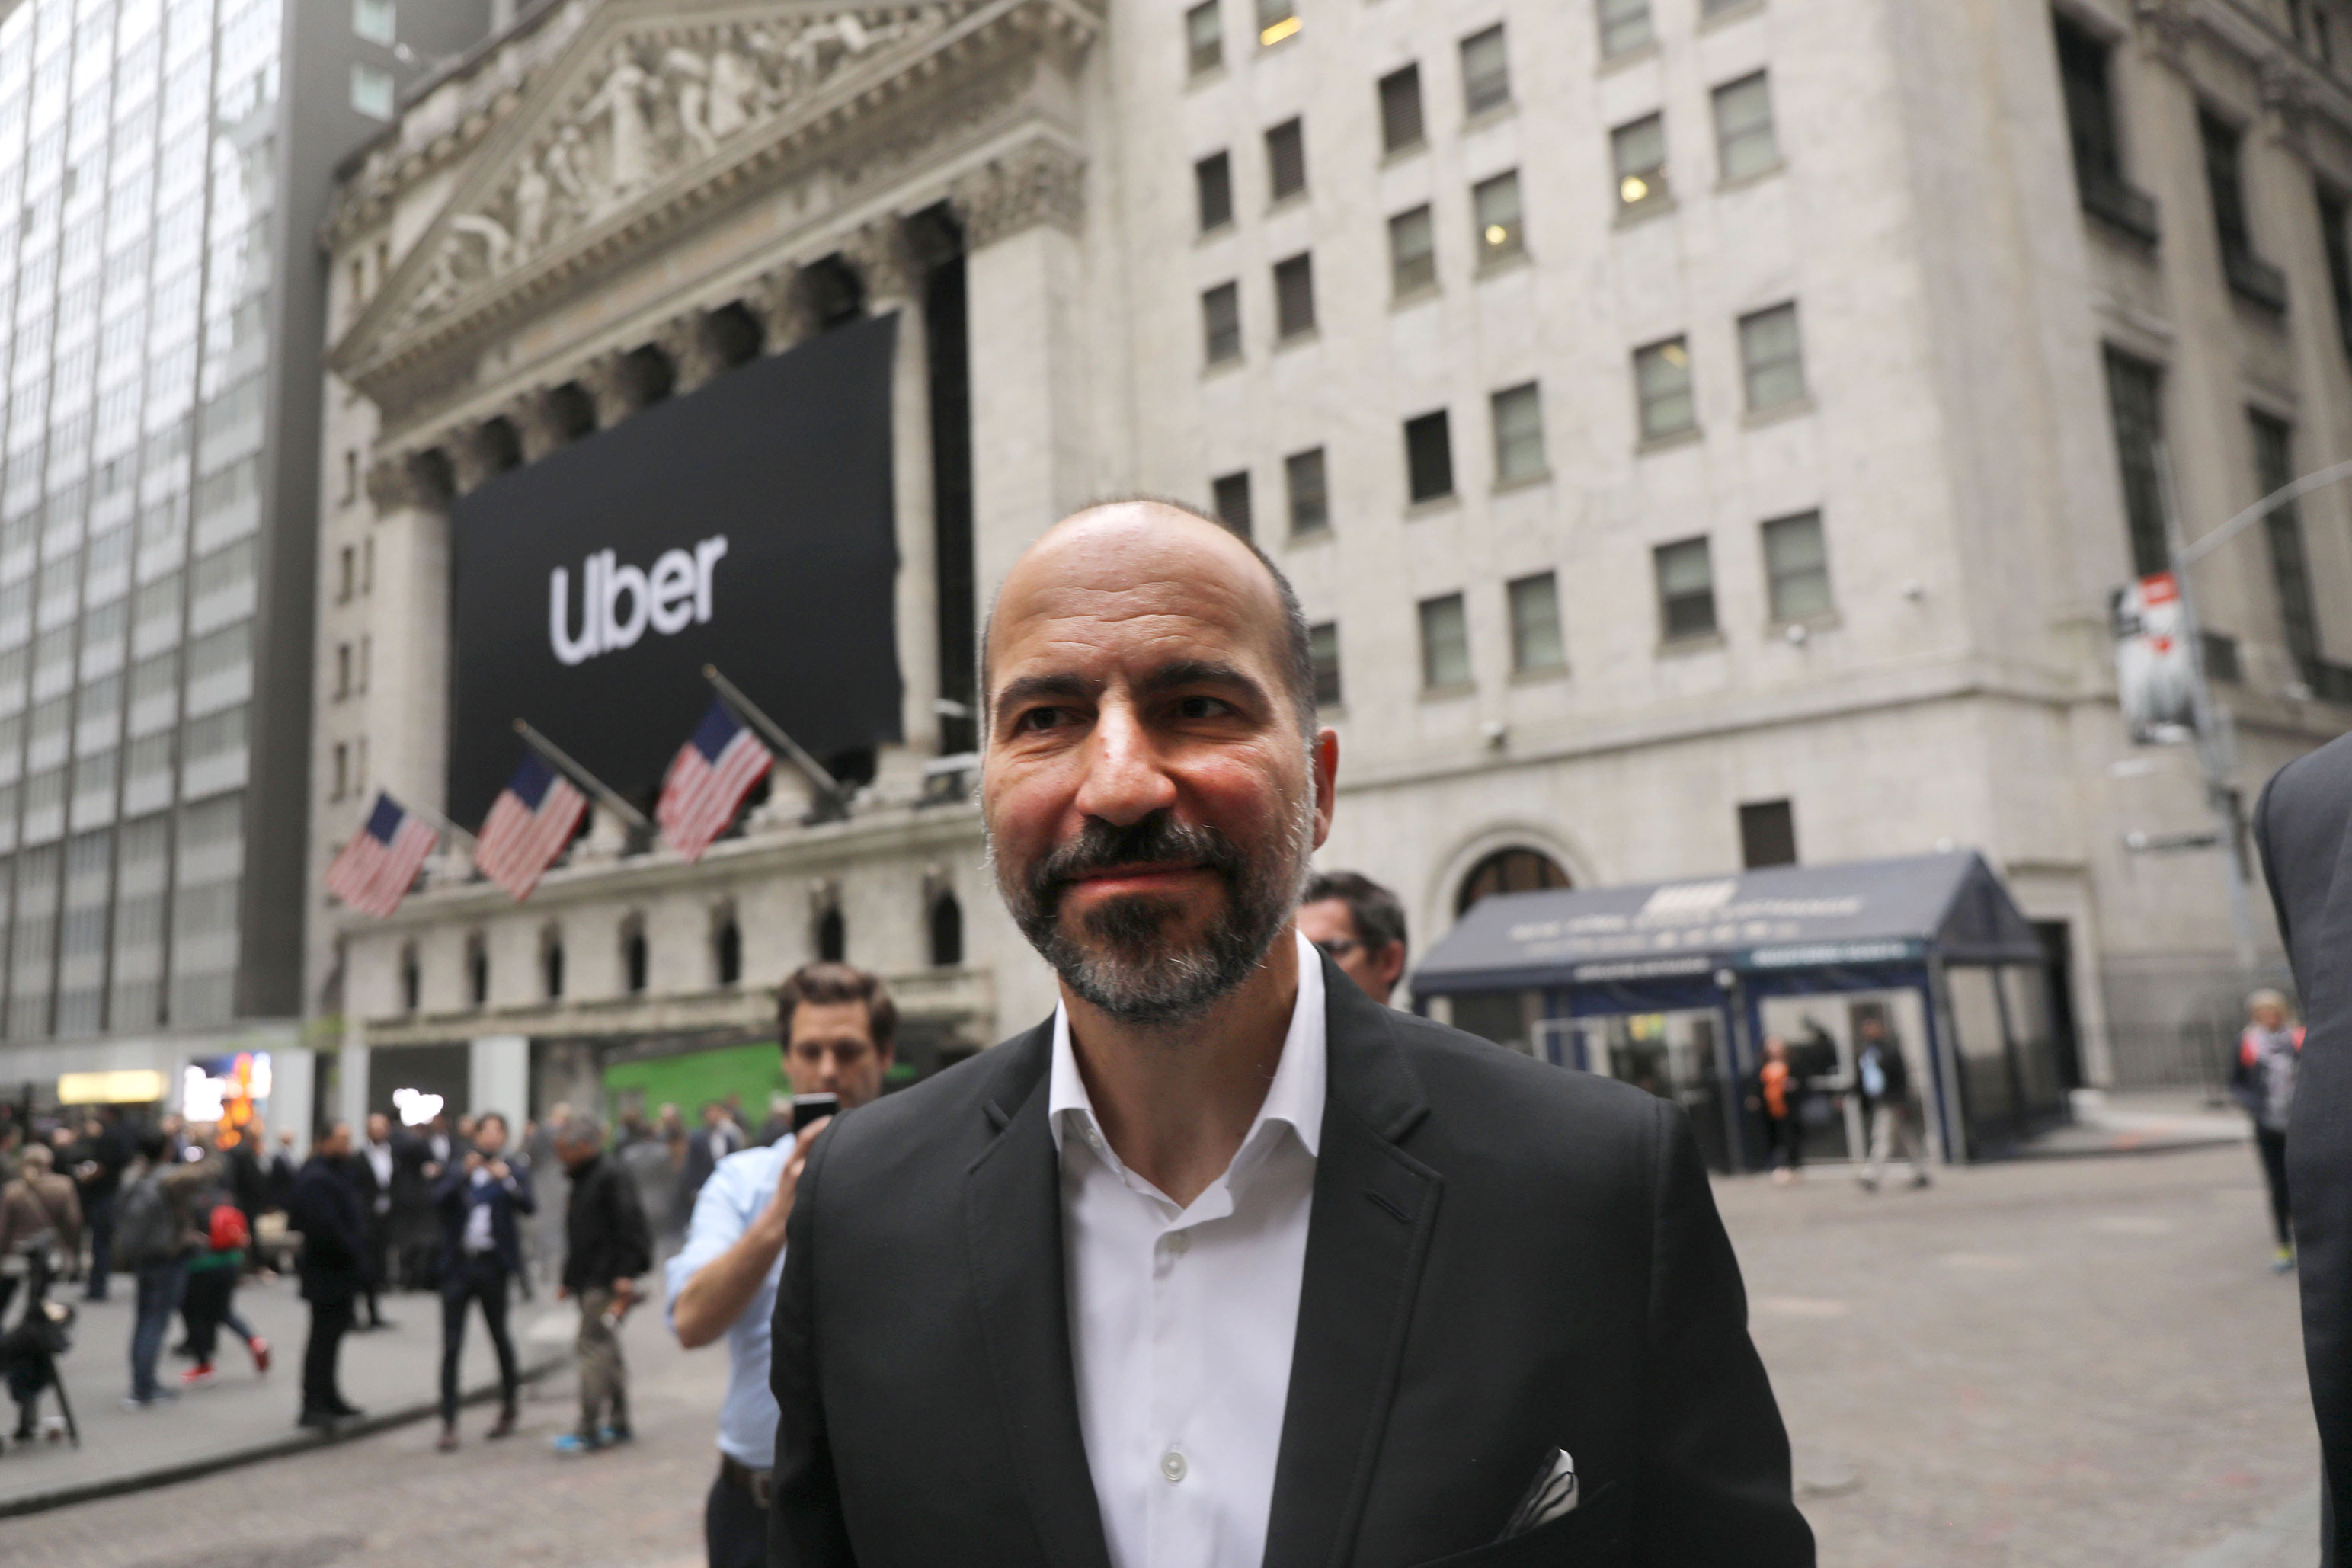 Uber Begins First Day Of Trading At New York Stock Exchange